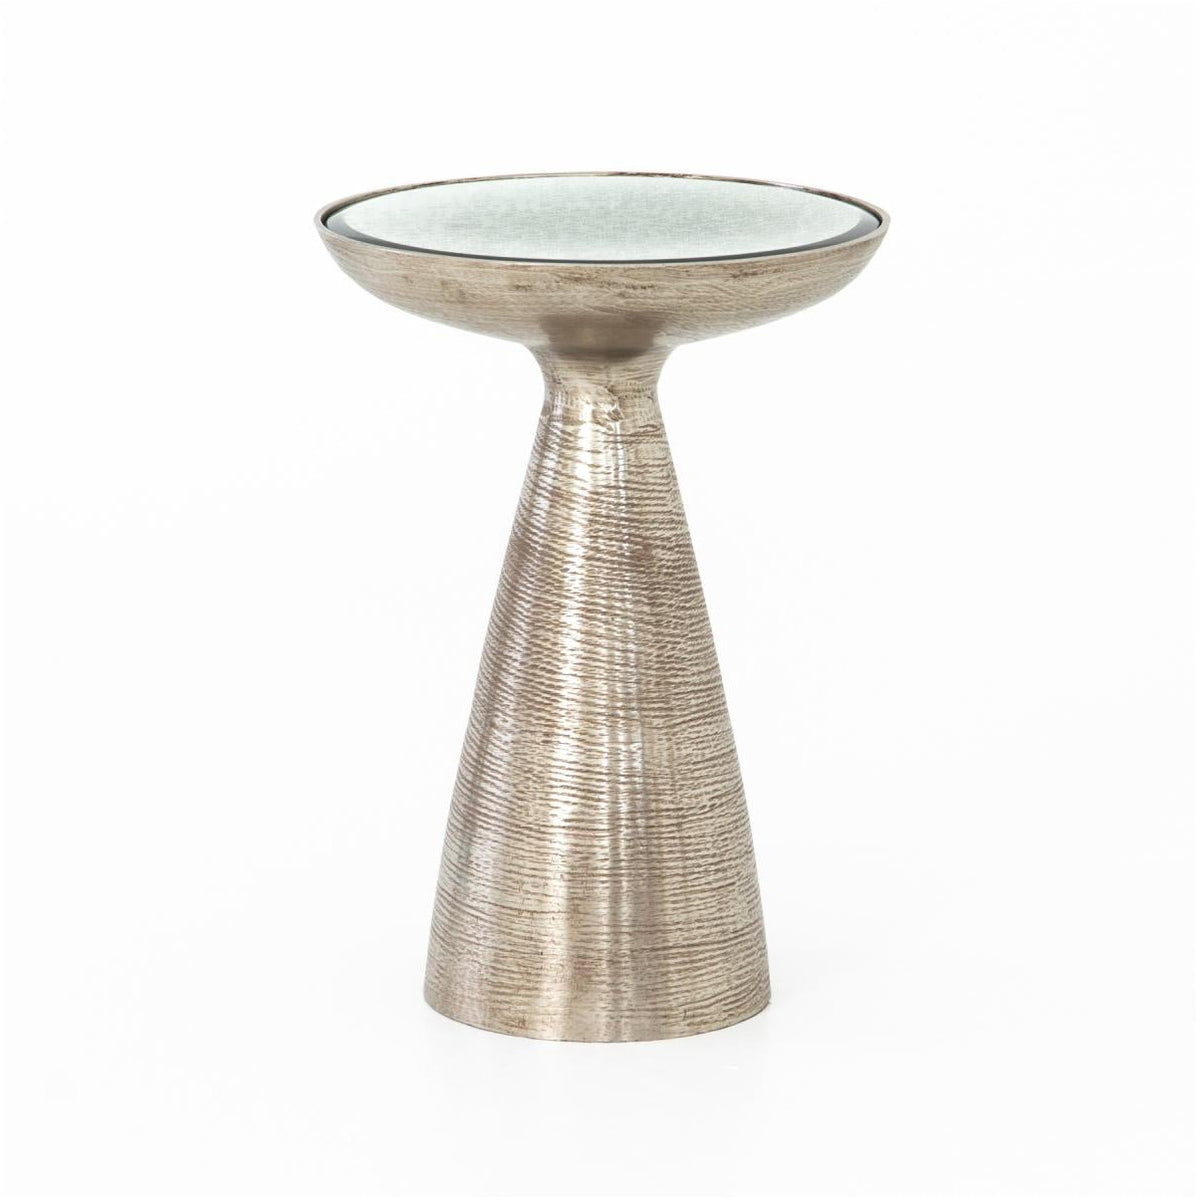 Marlow Mod Ped Table- Nickel